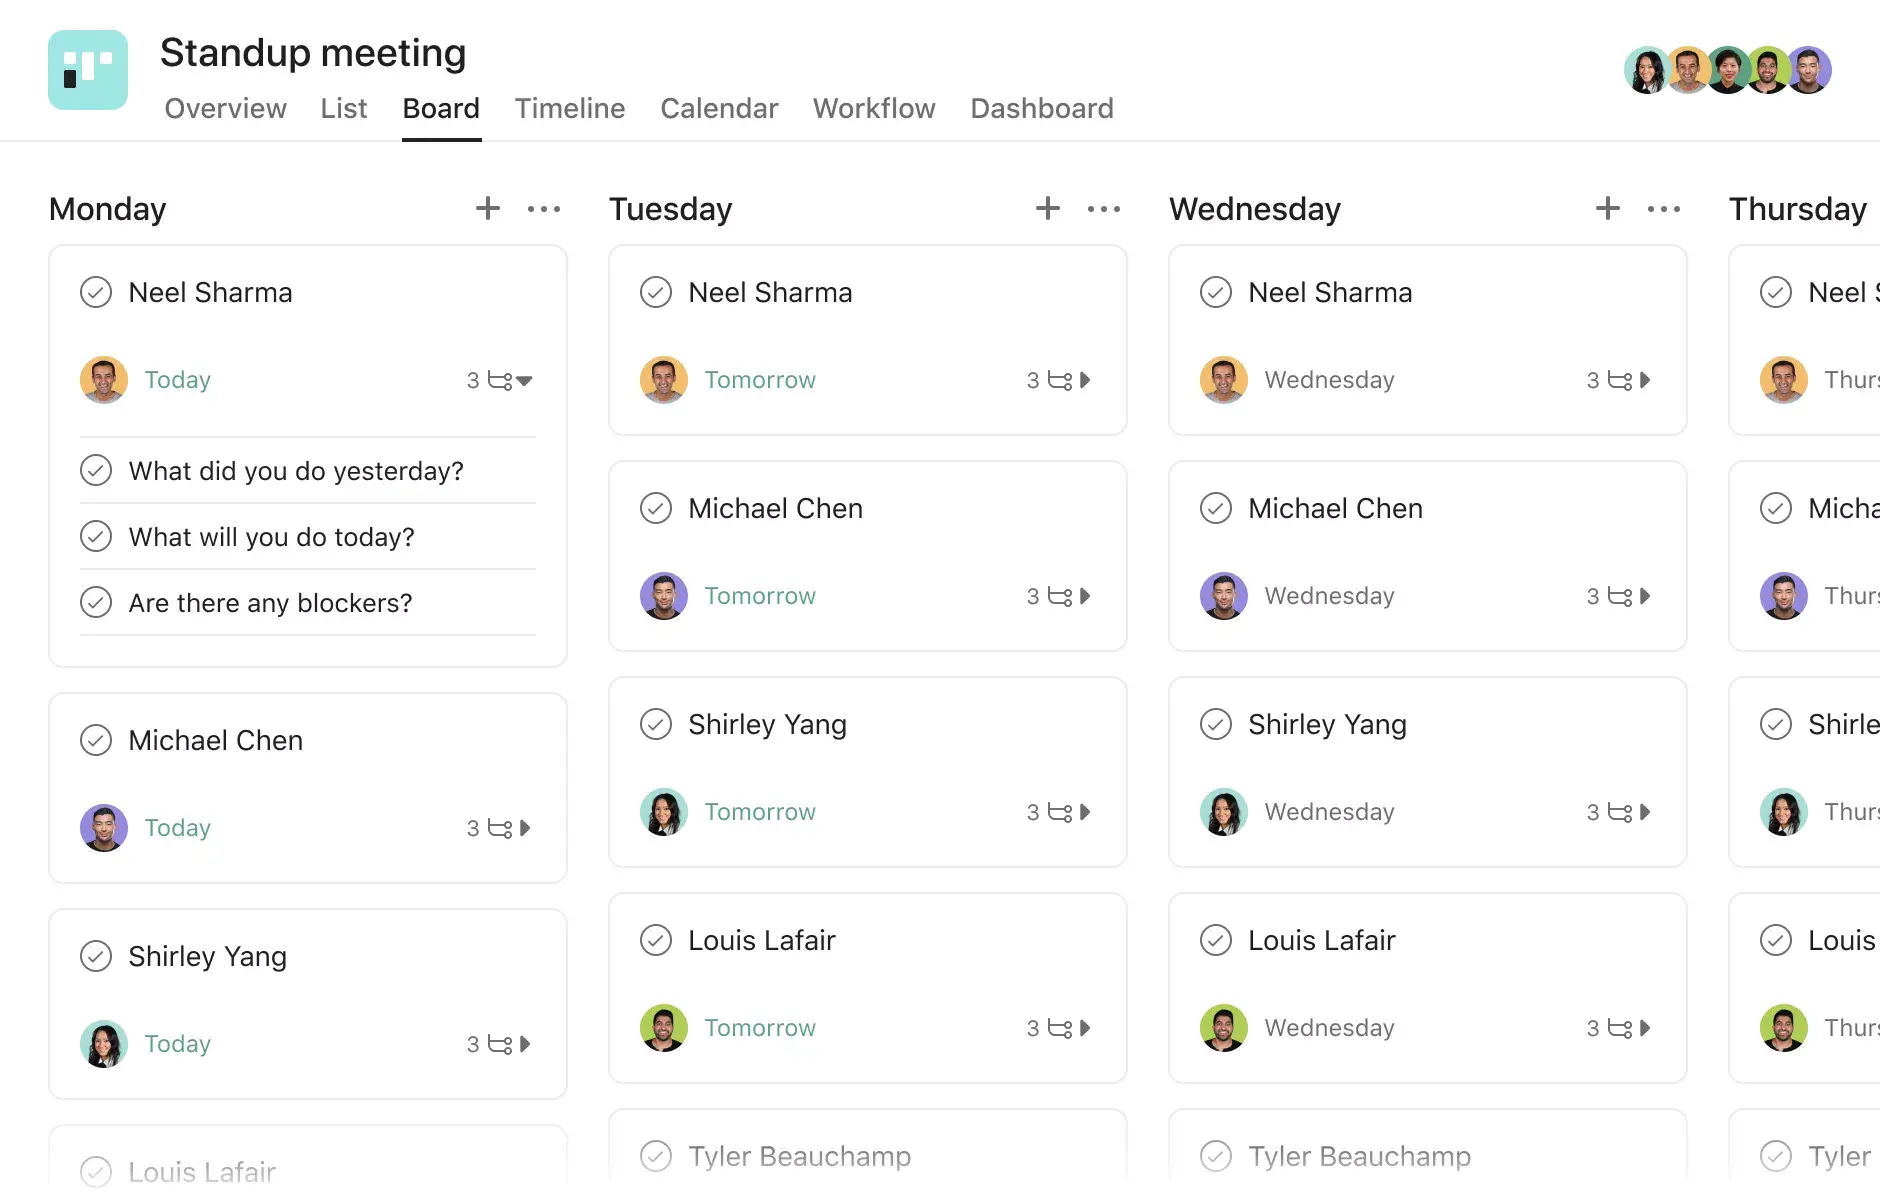 [Product UI] Standup meeting project example (Boards)